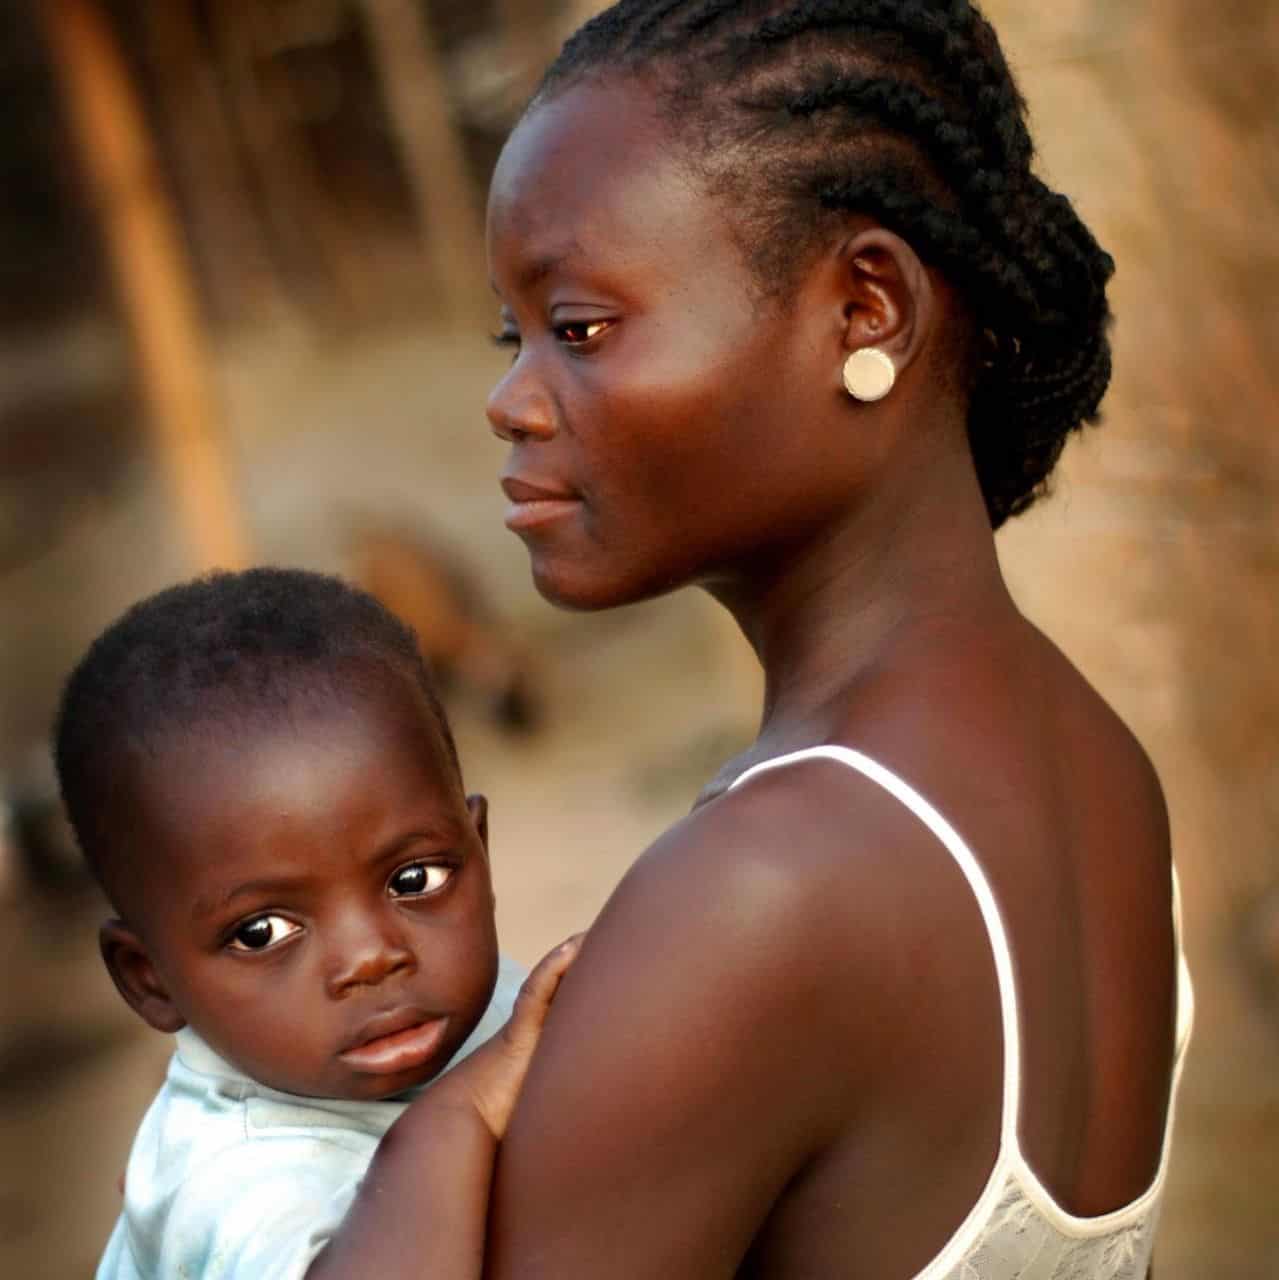 health volunteers in Africa support this mother and her child